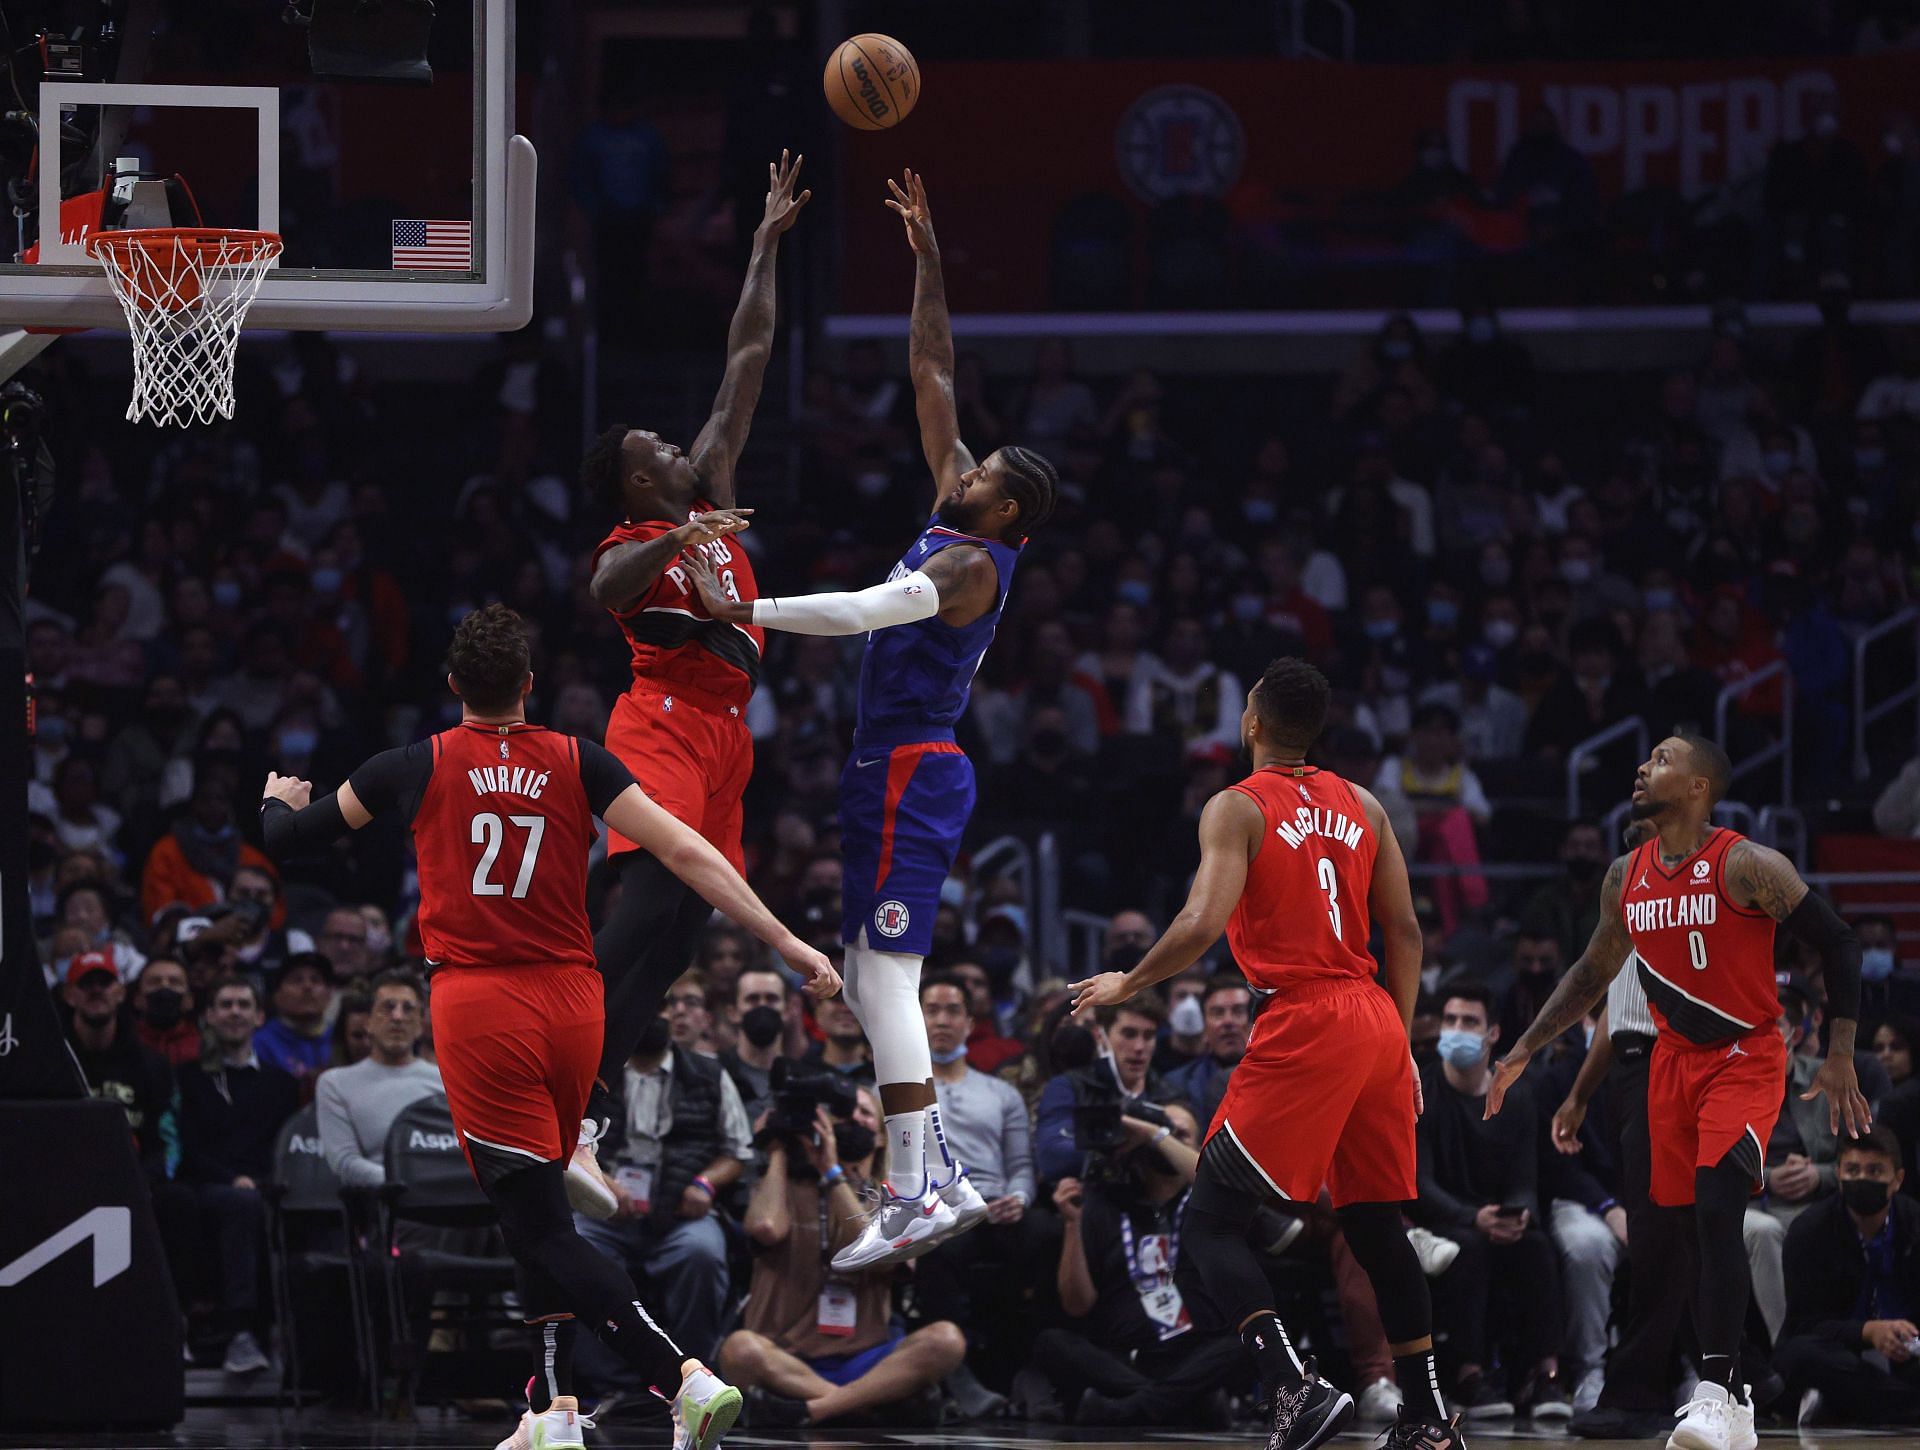 Paul George of the Los Angeles Clippers in action against the Portland Trail Blazers